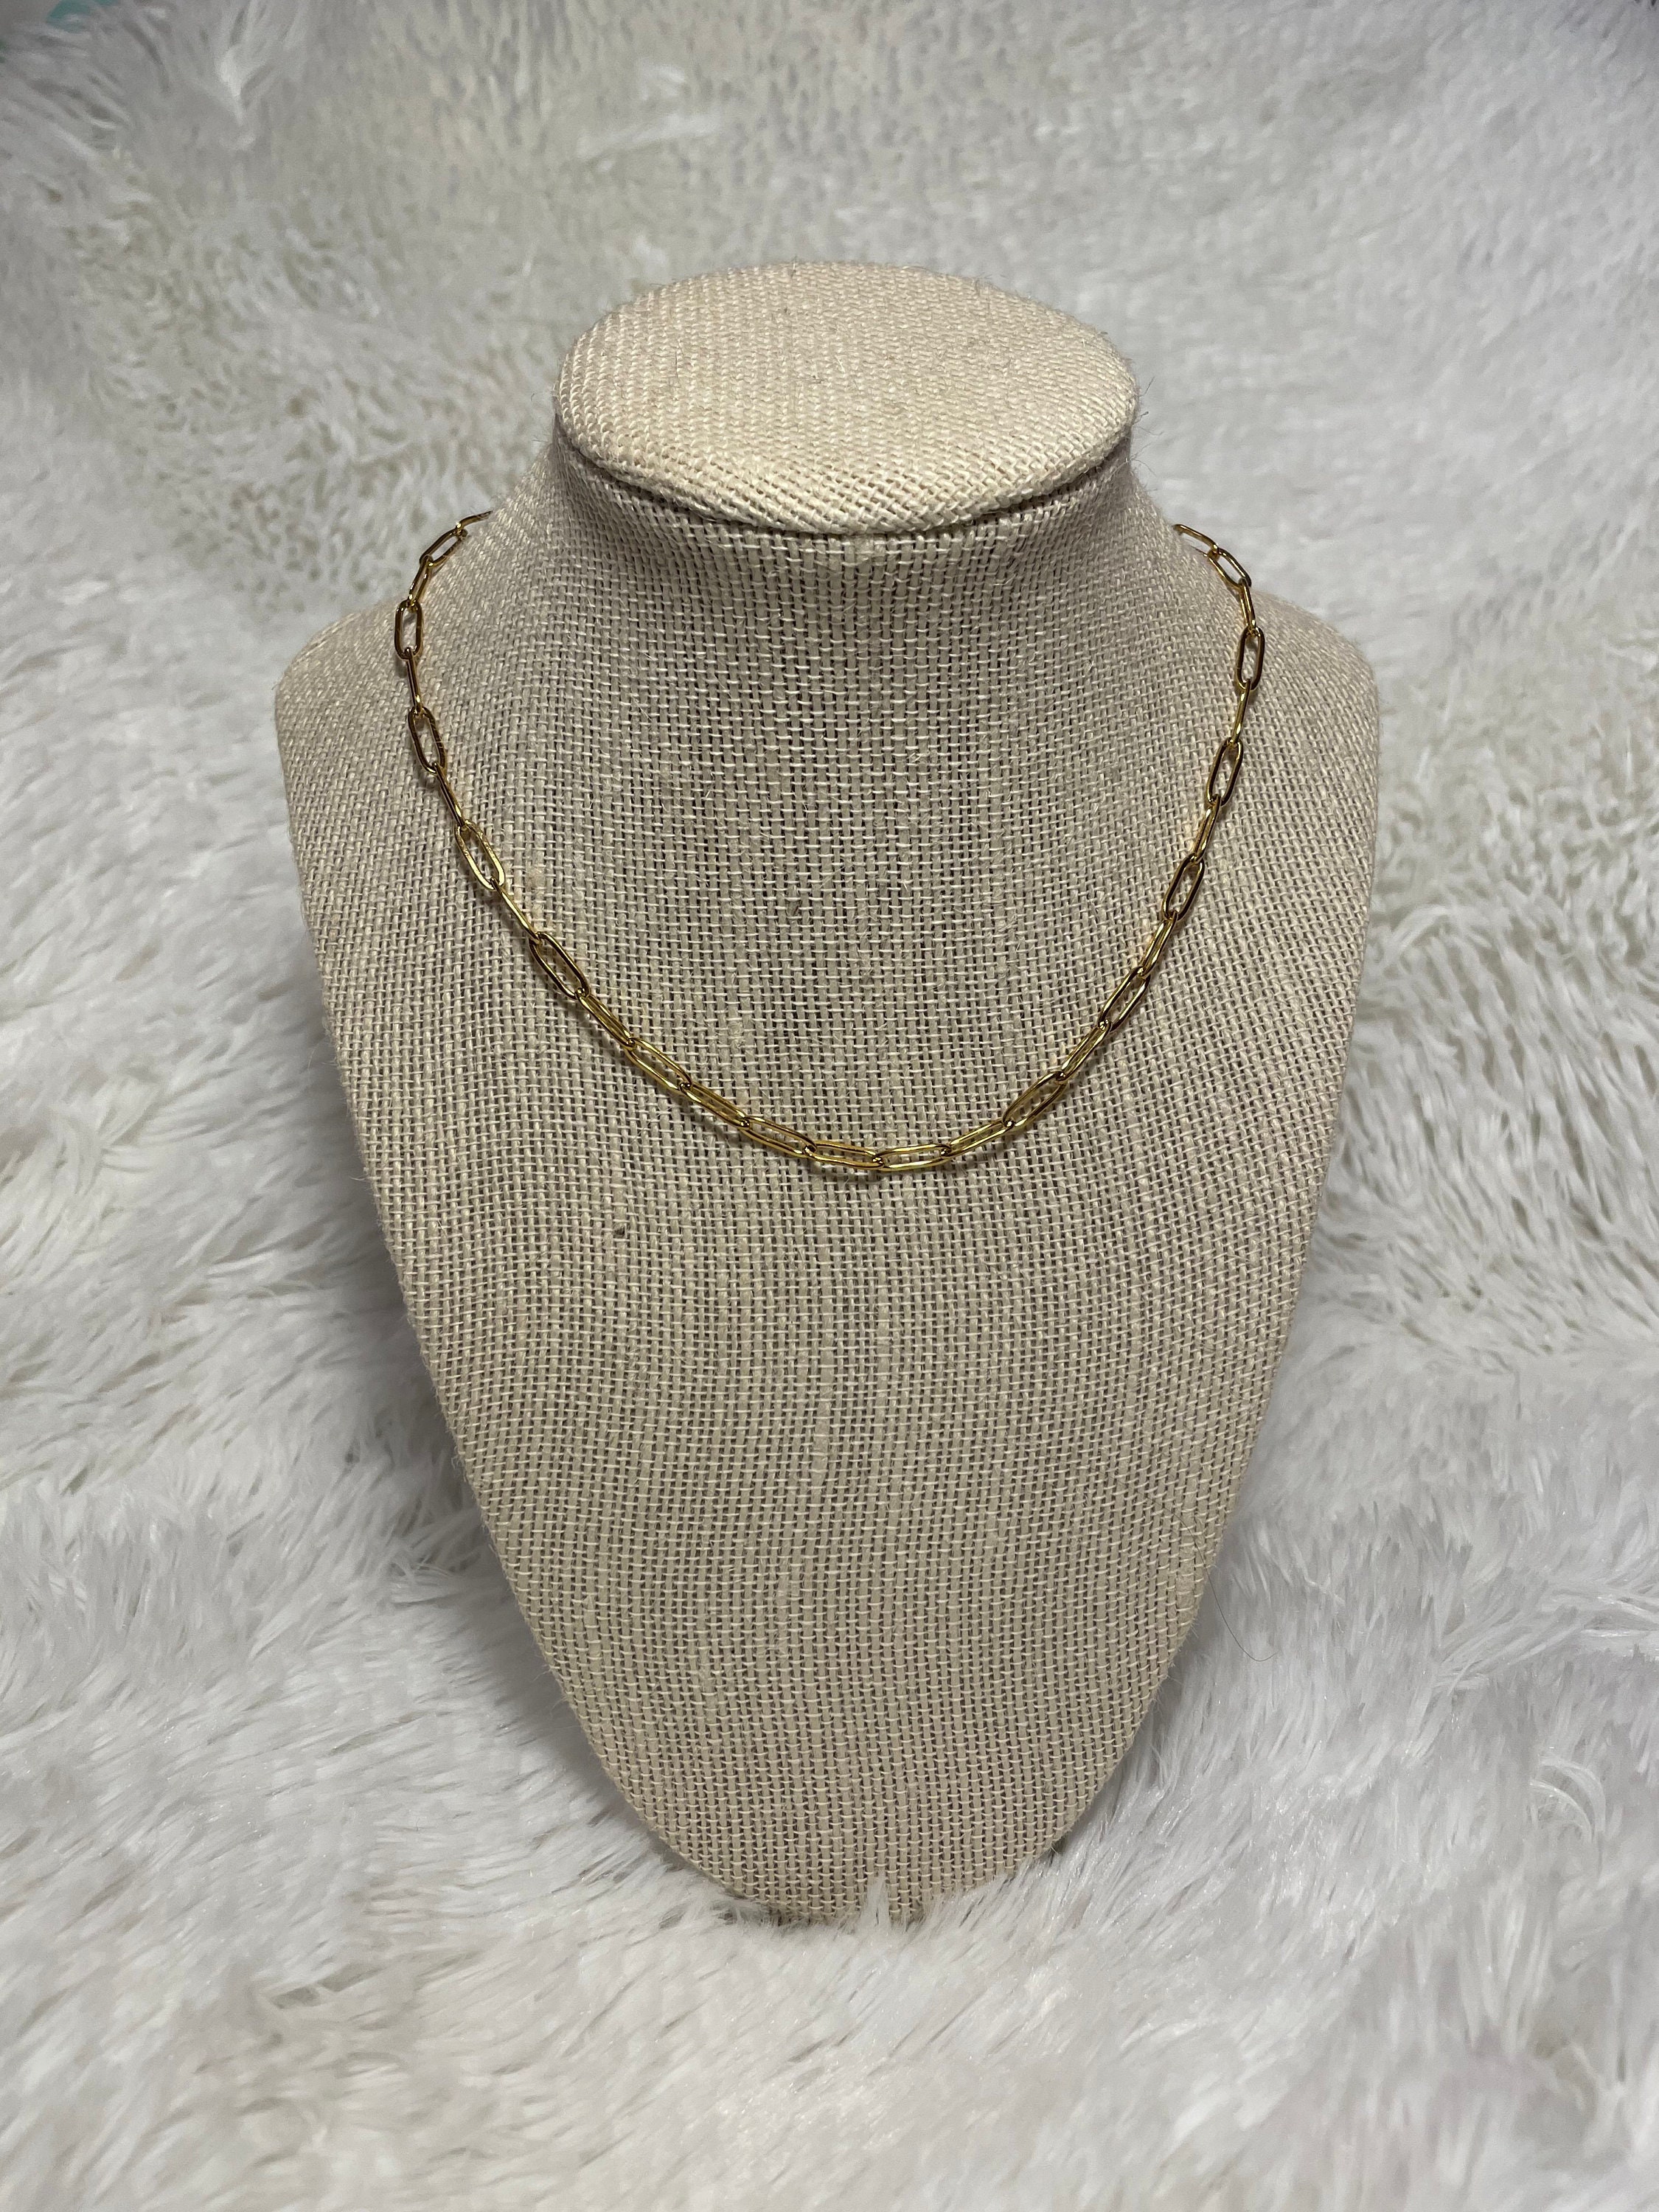 Gold Paperclip Necklace two length options | Etsy